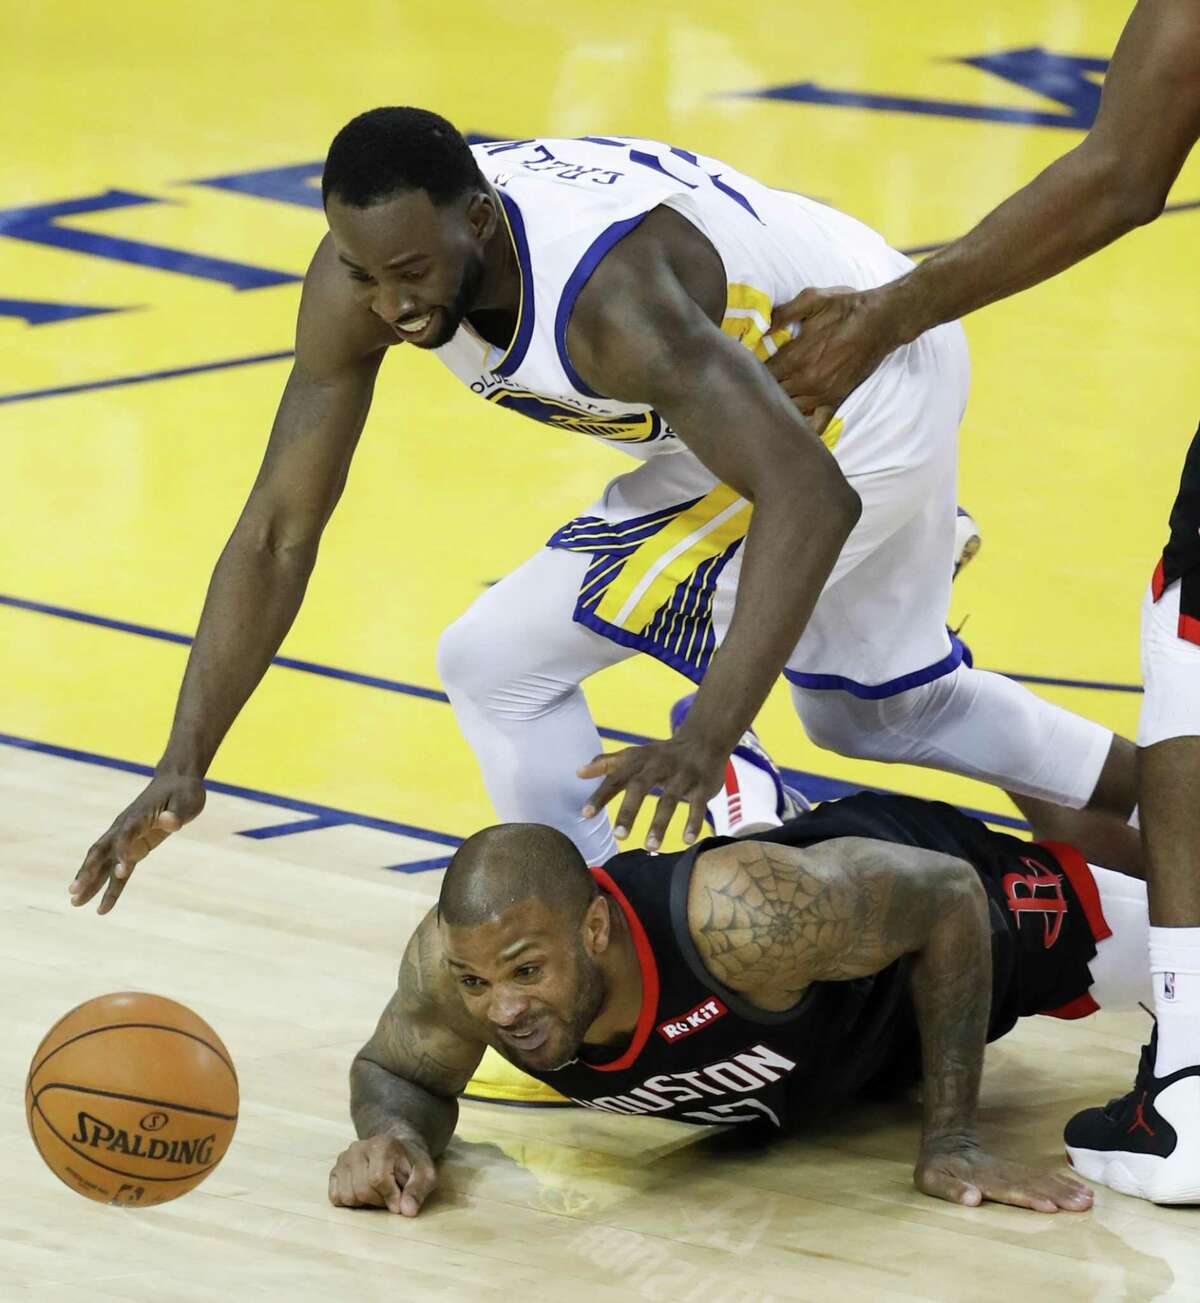 Golden State Warriors Draymond Green and Houston Rockets P.J. Tucker scramble for a loose ball in the fourth quarter during game 1 of the Western Conference Semifinals between the Golden State Warriors and the Houston Rockets at Oracle Arena on Sunday, April 28, 2019 in Oakland, Calif.